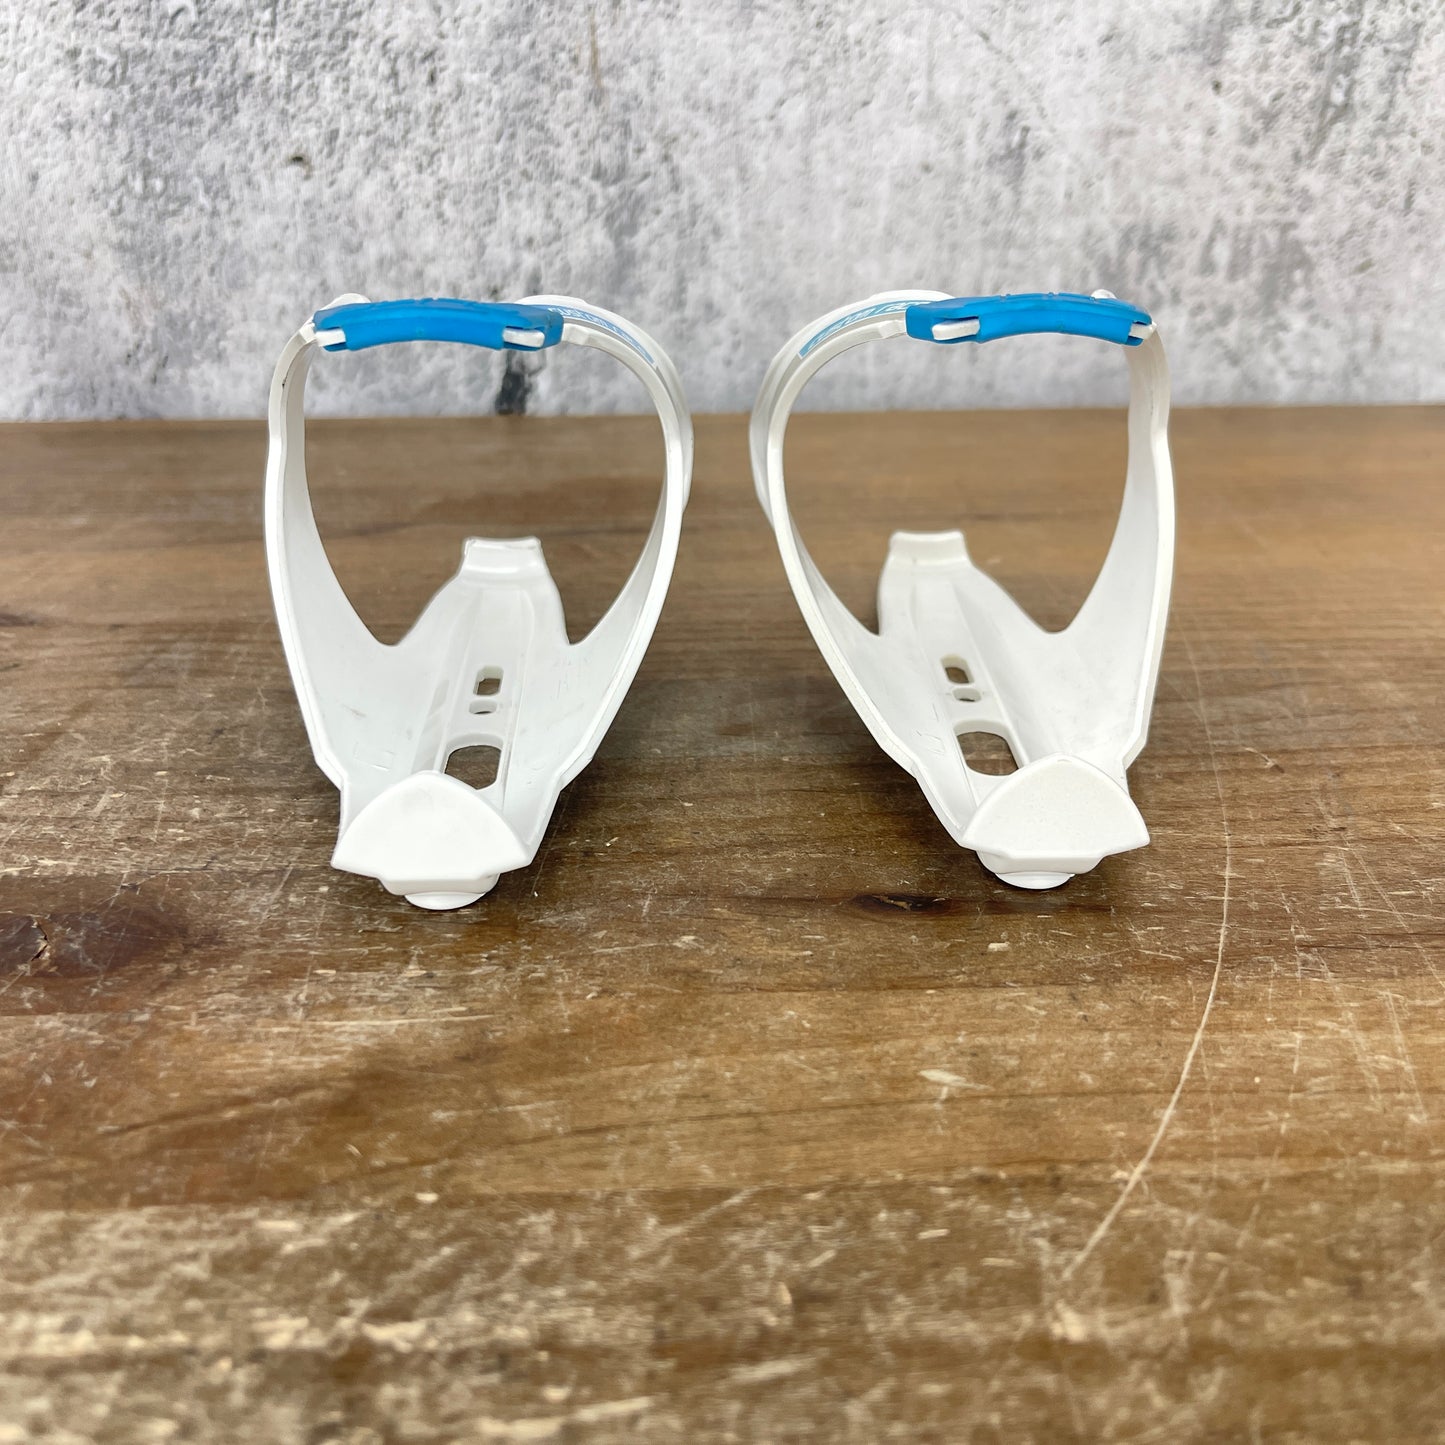 Pair Elite Custom Race Cycling Water Bottle Cages 89g